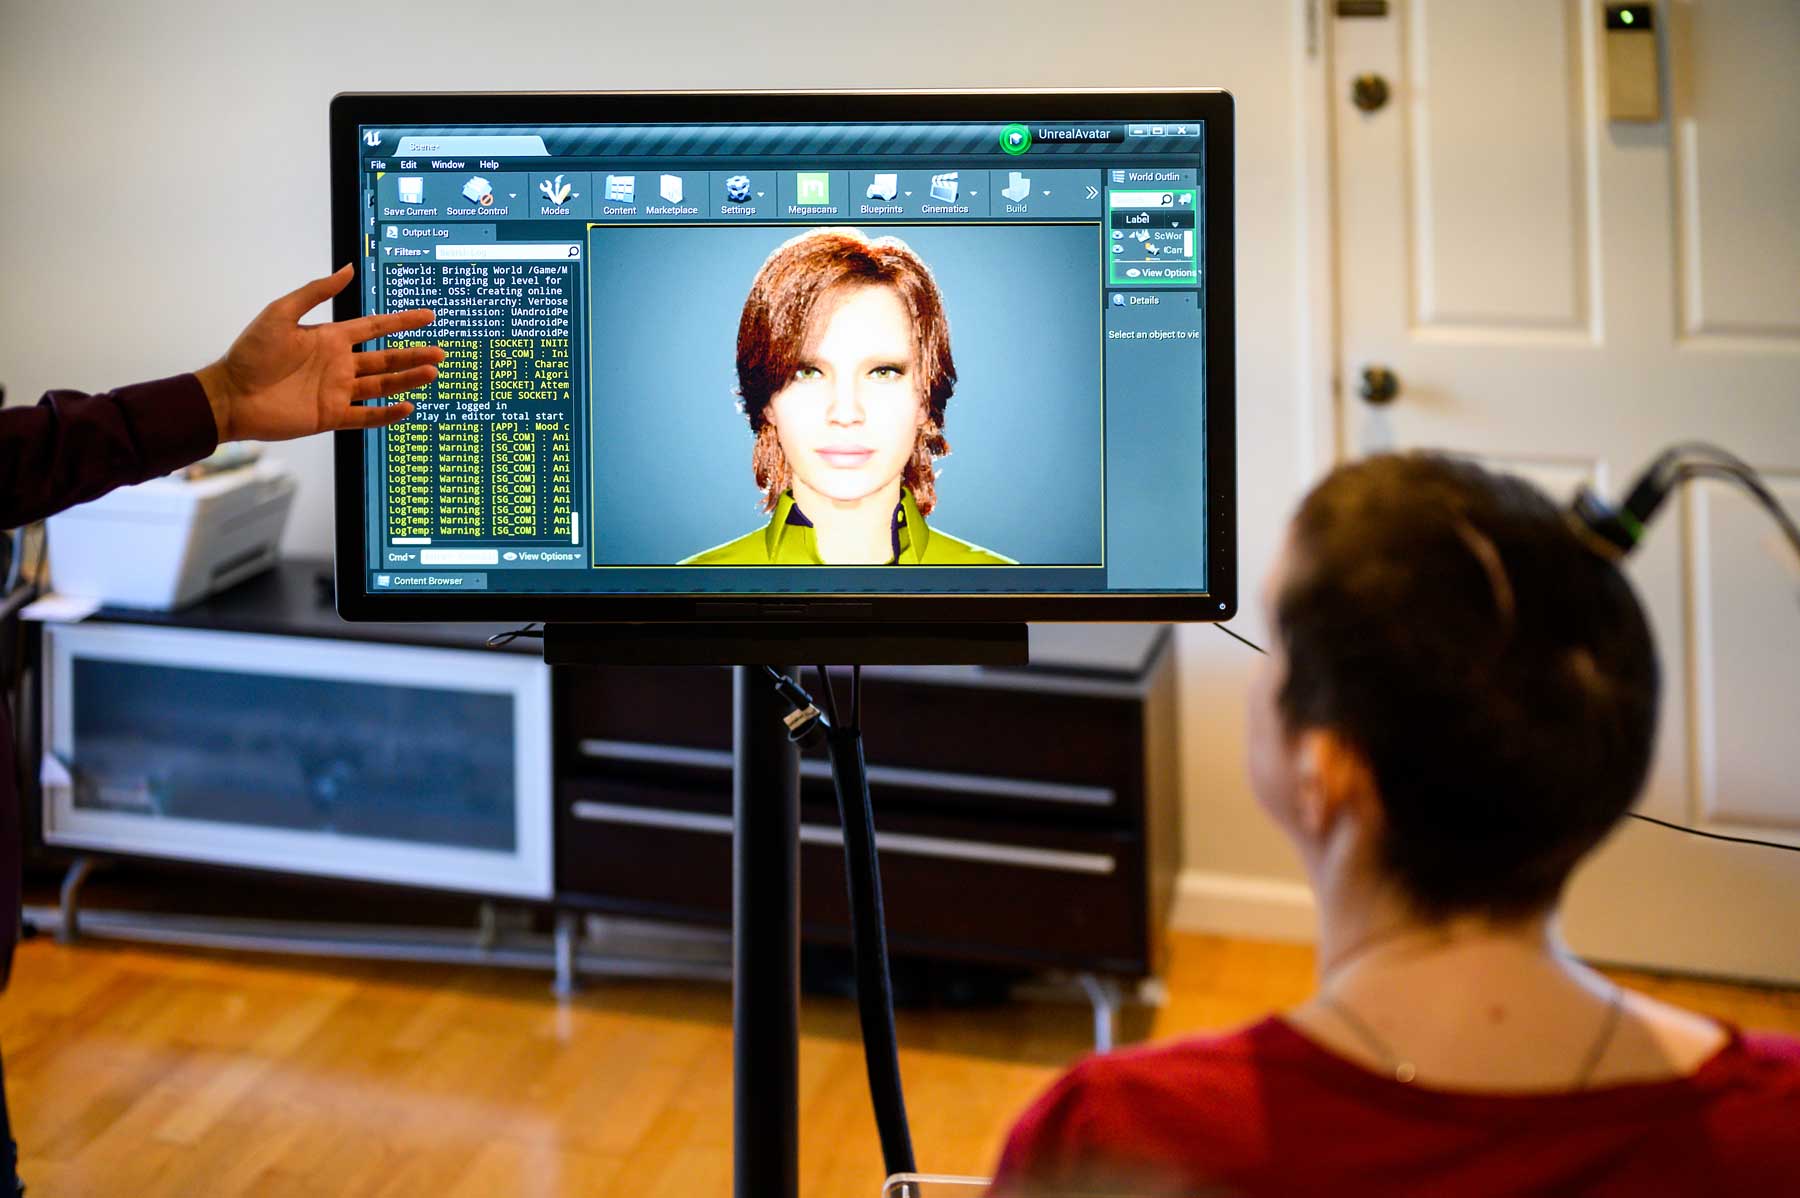 Ann, wearing an implant on her head, in red shirt, looks at a screen with a woman's face on it